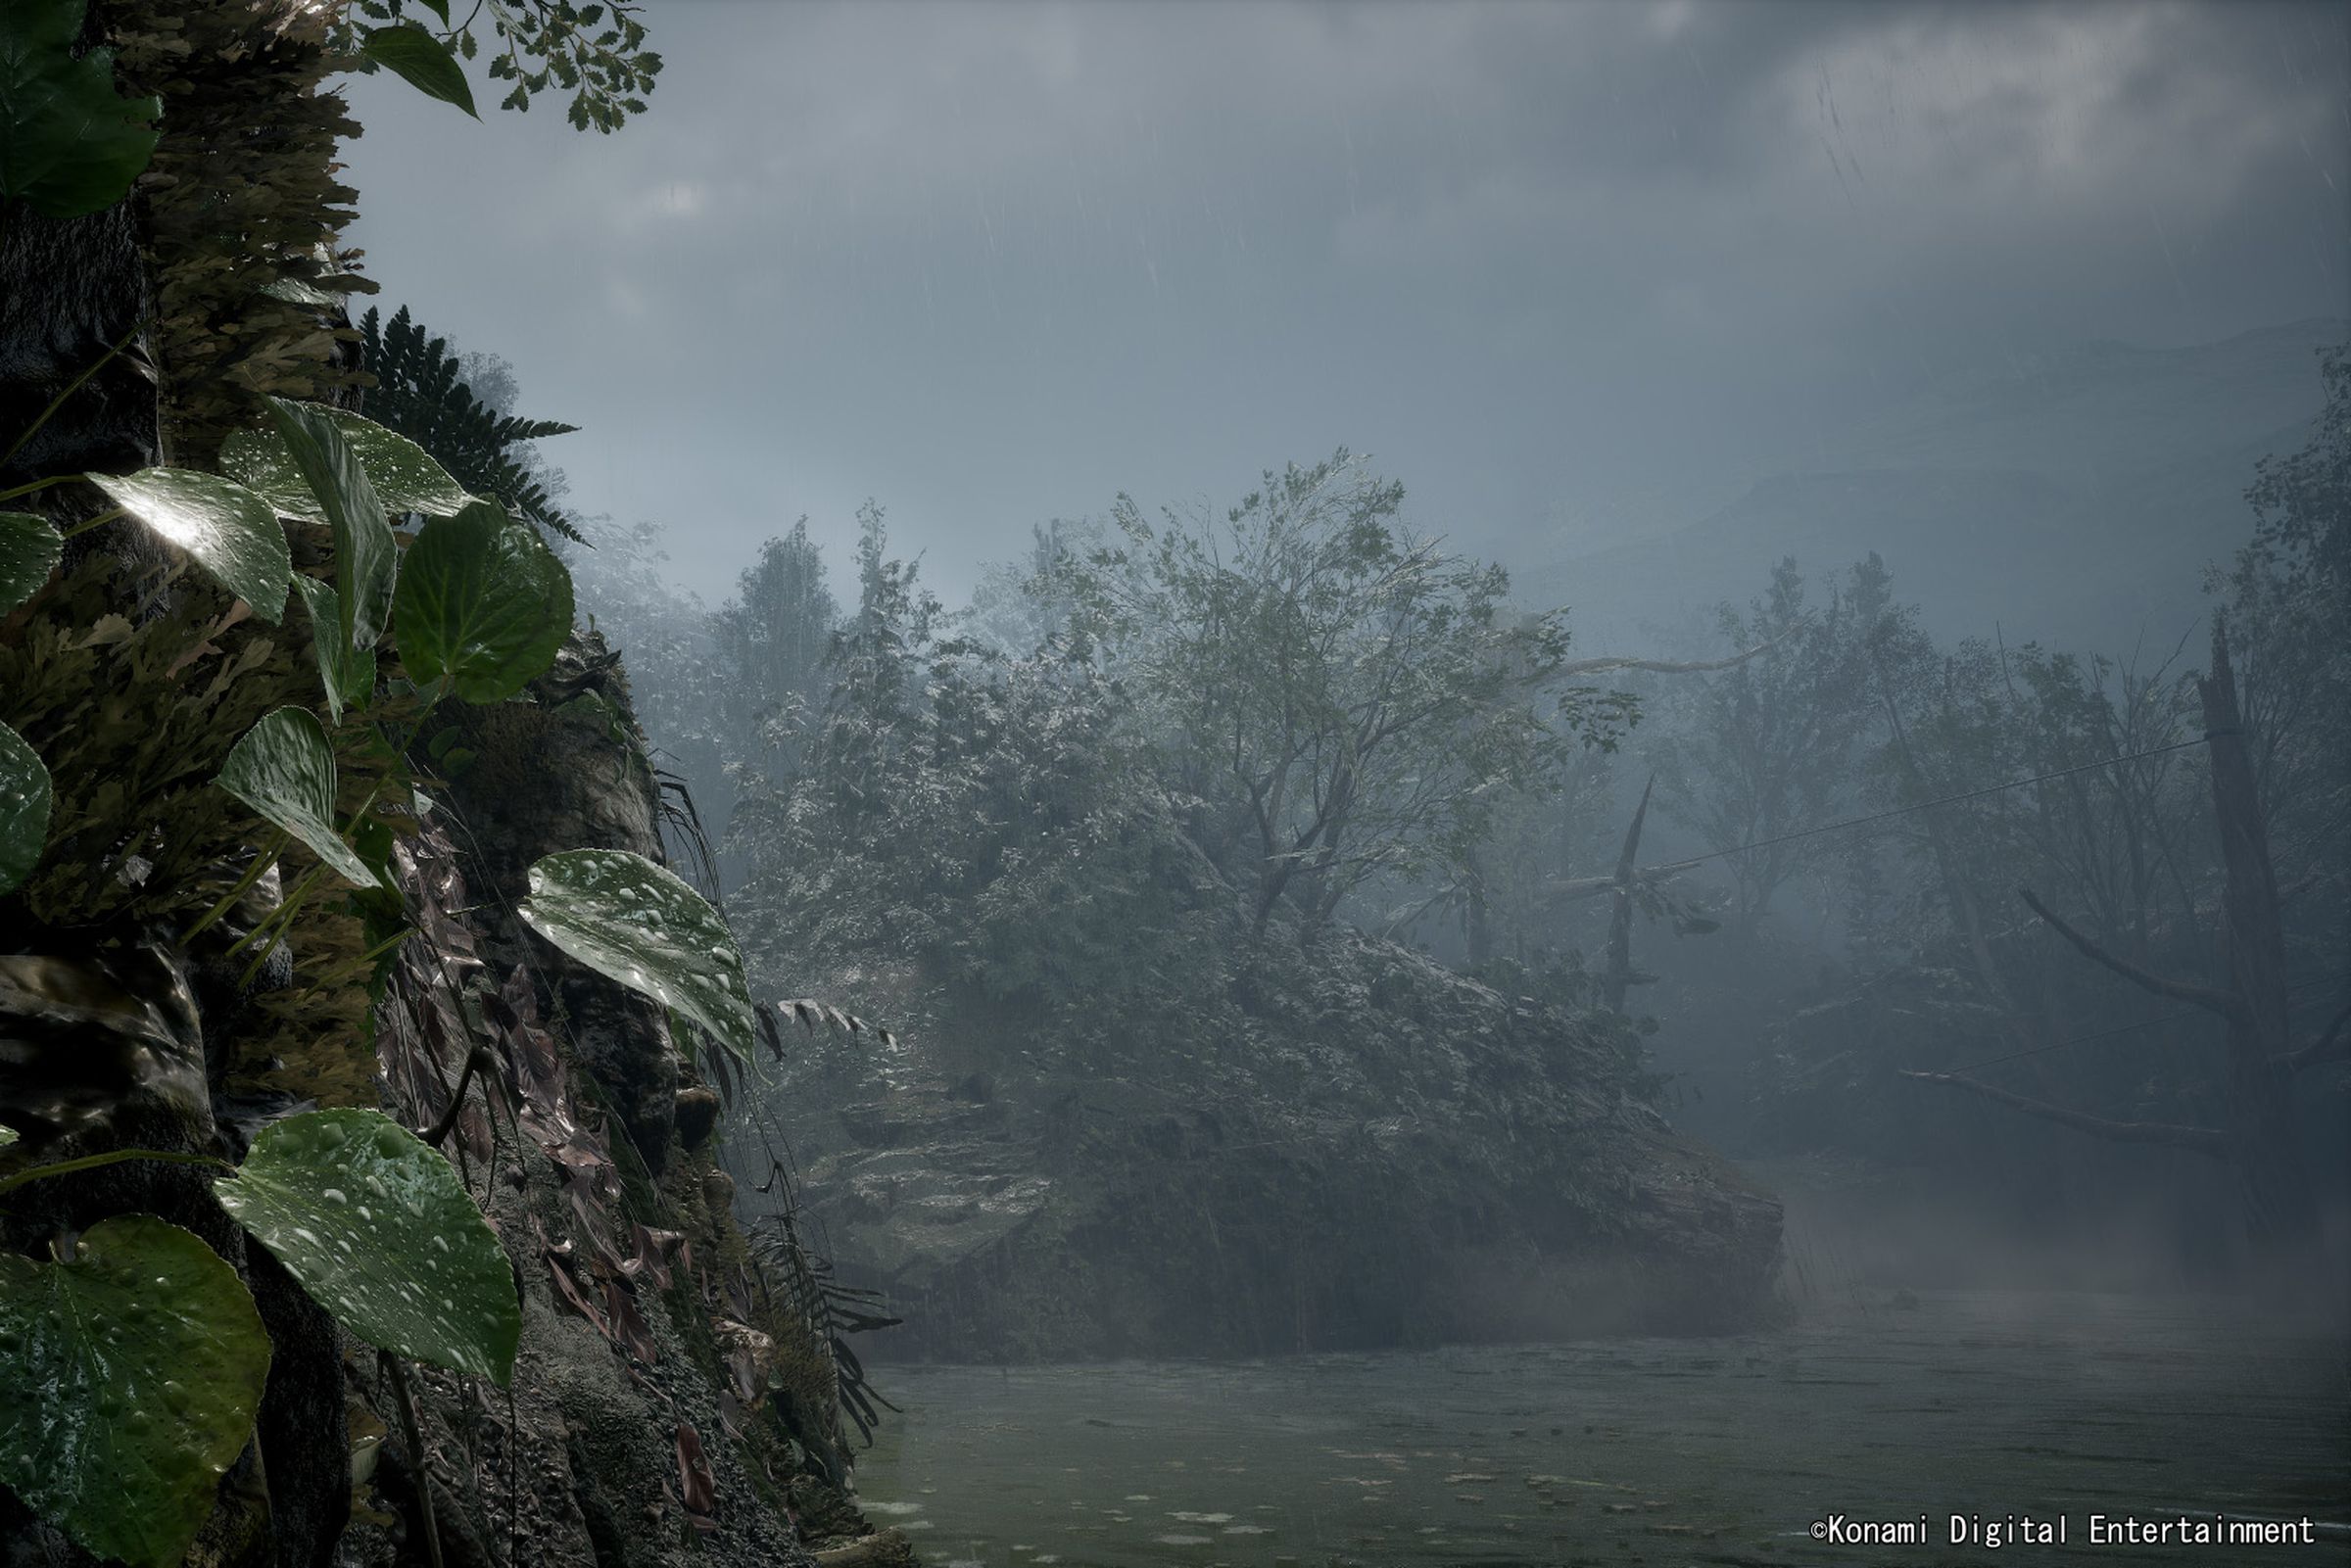 A screenshot from Konami’s MGS3 remake showing a misty swamp.